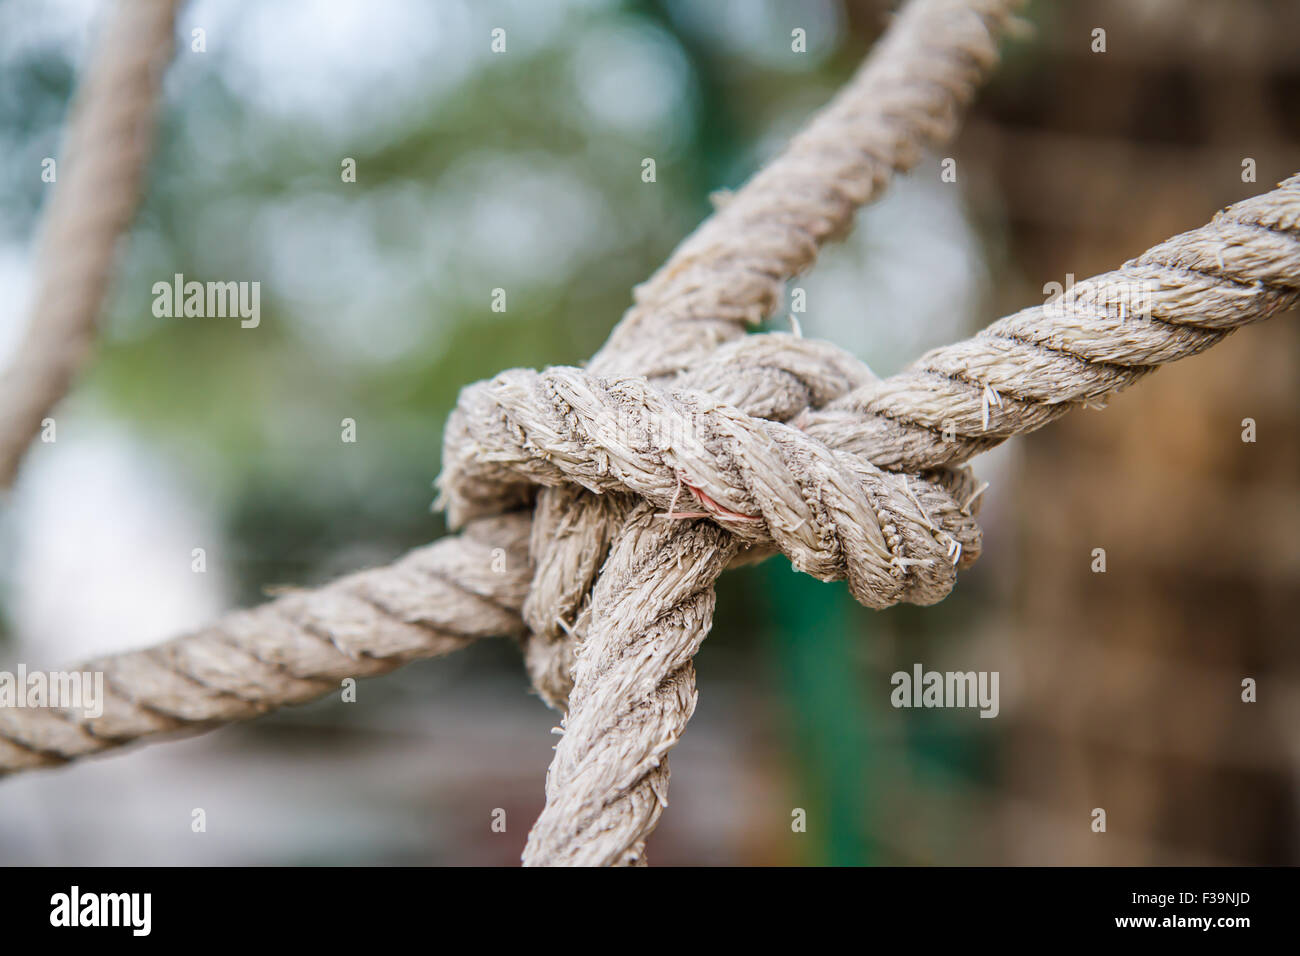 Rope knotted. Stock Photo